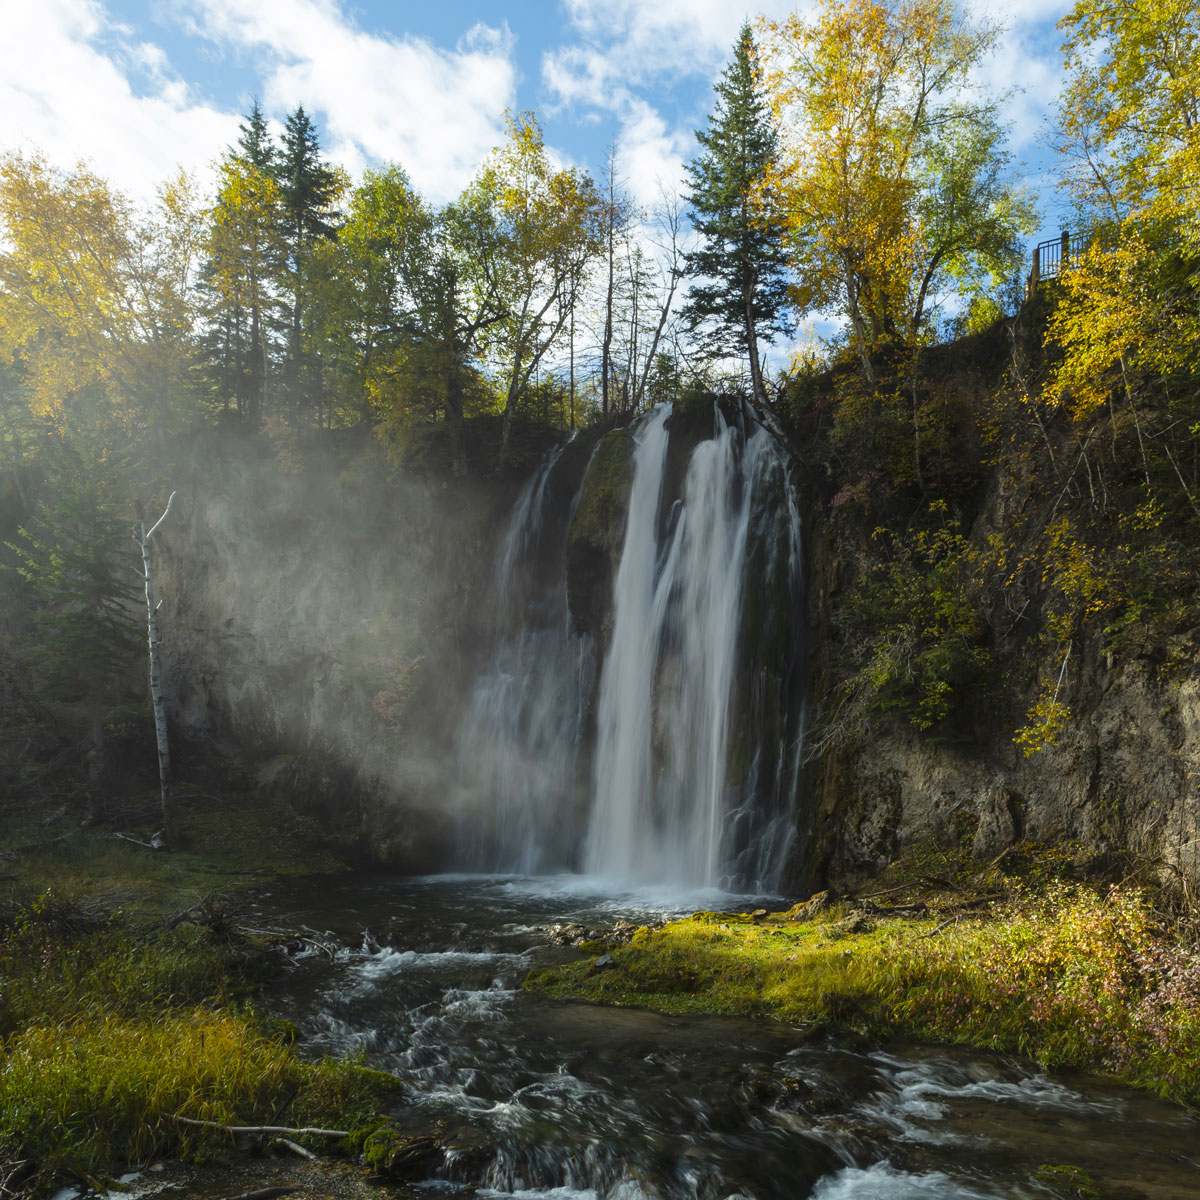 White water crashes down Spearfish Falls casting a silvery mist in the golden early morning light amid trees of yellow and green Autumn colors.